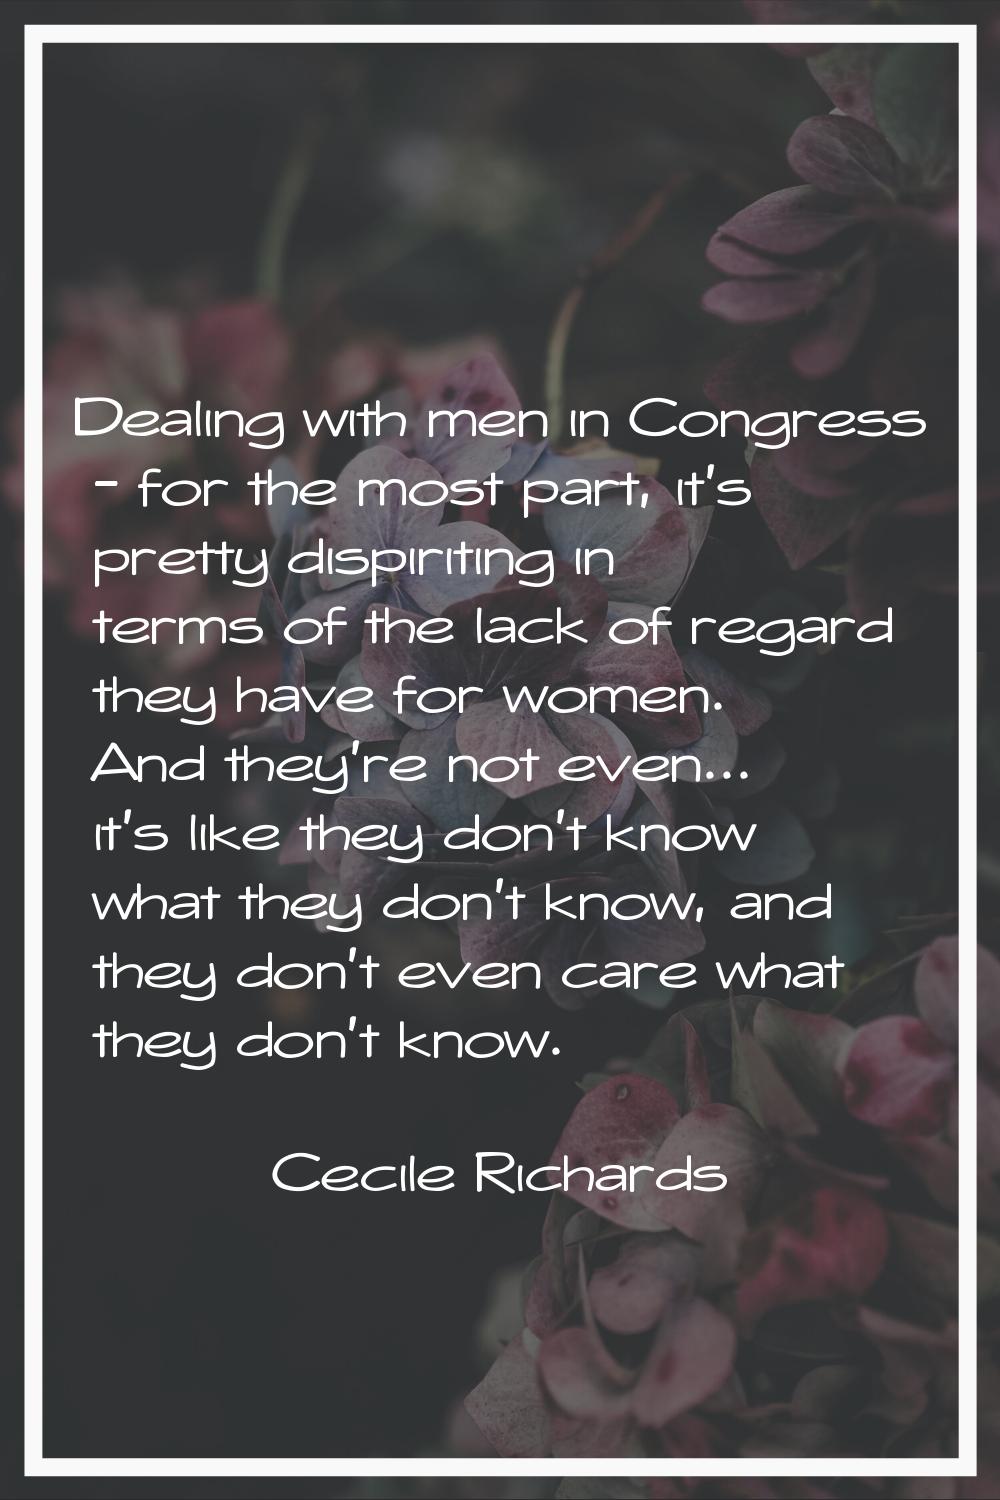 Dealing with men in Congress - for the most part, it's pretty dispiriting in terms of the lack of r